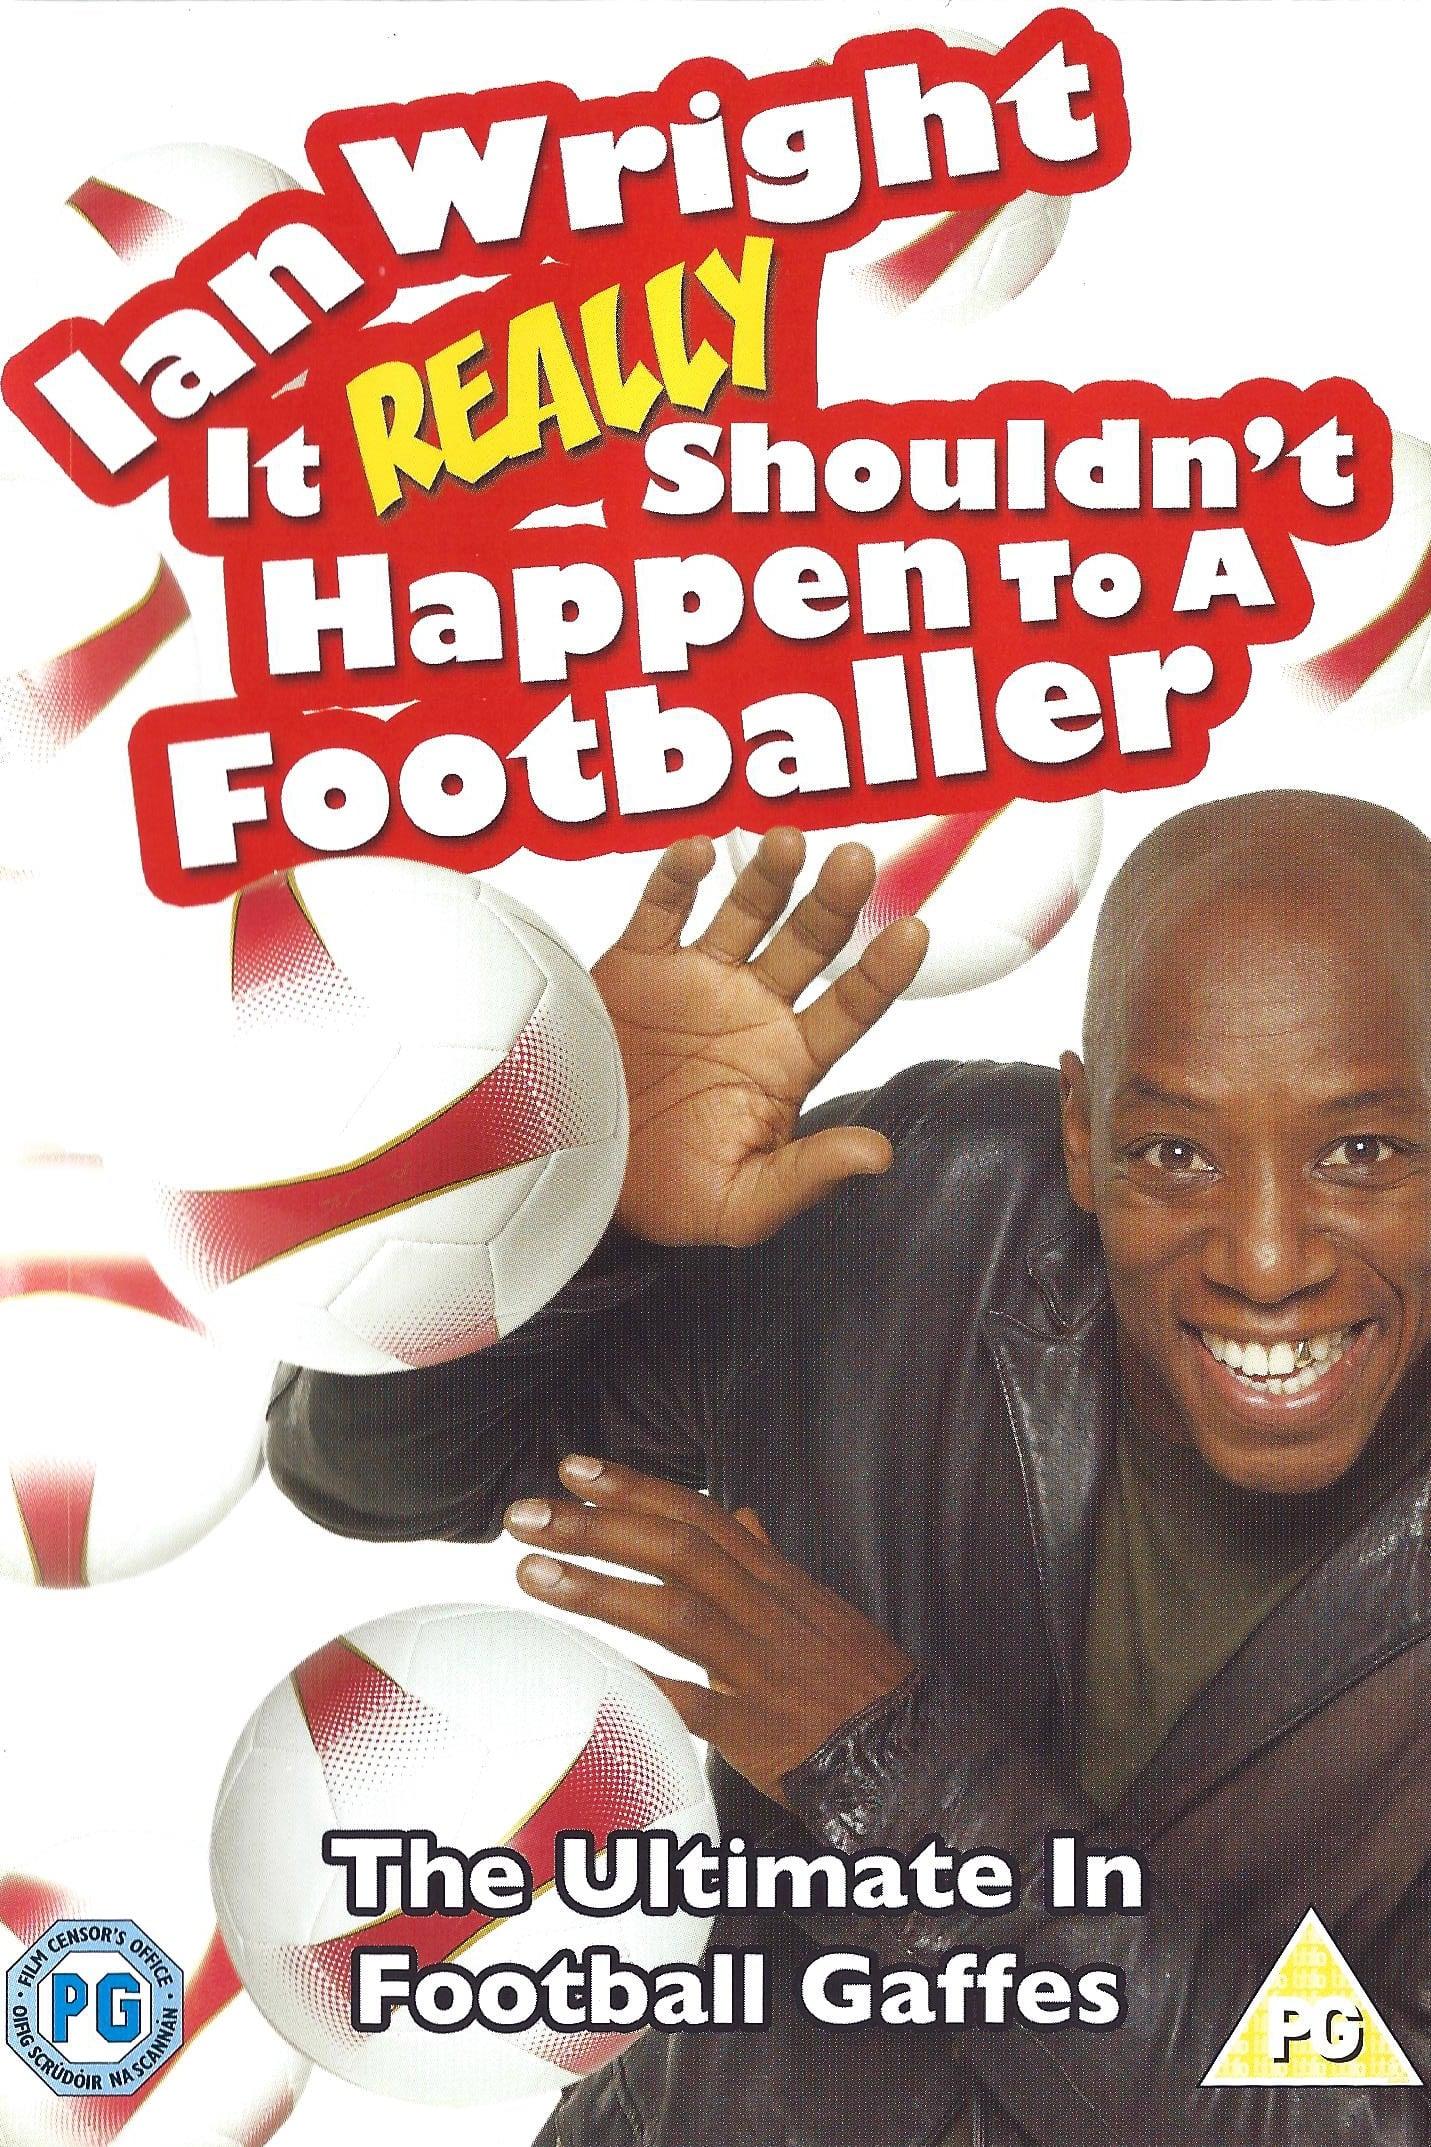 Ian Wright: It Really Shouldn't Happen To A Footballer poster